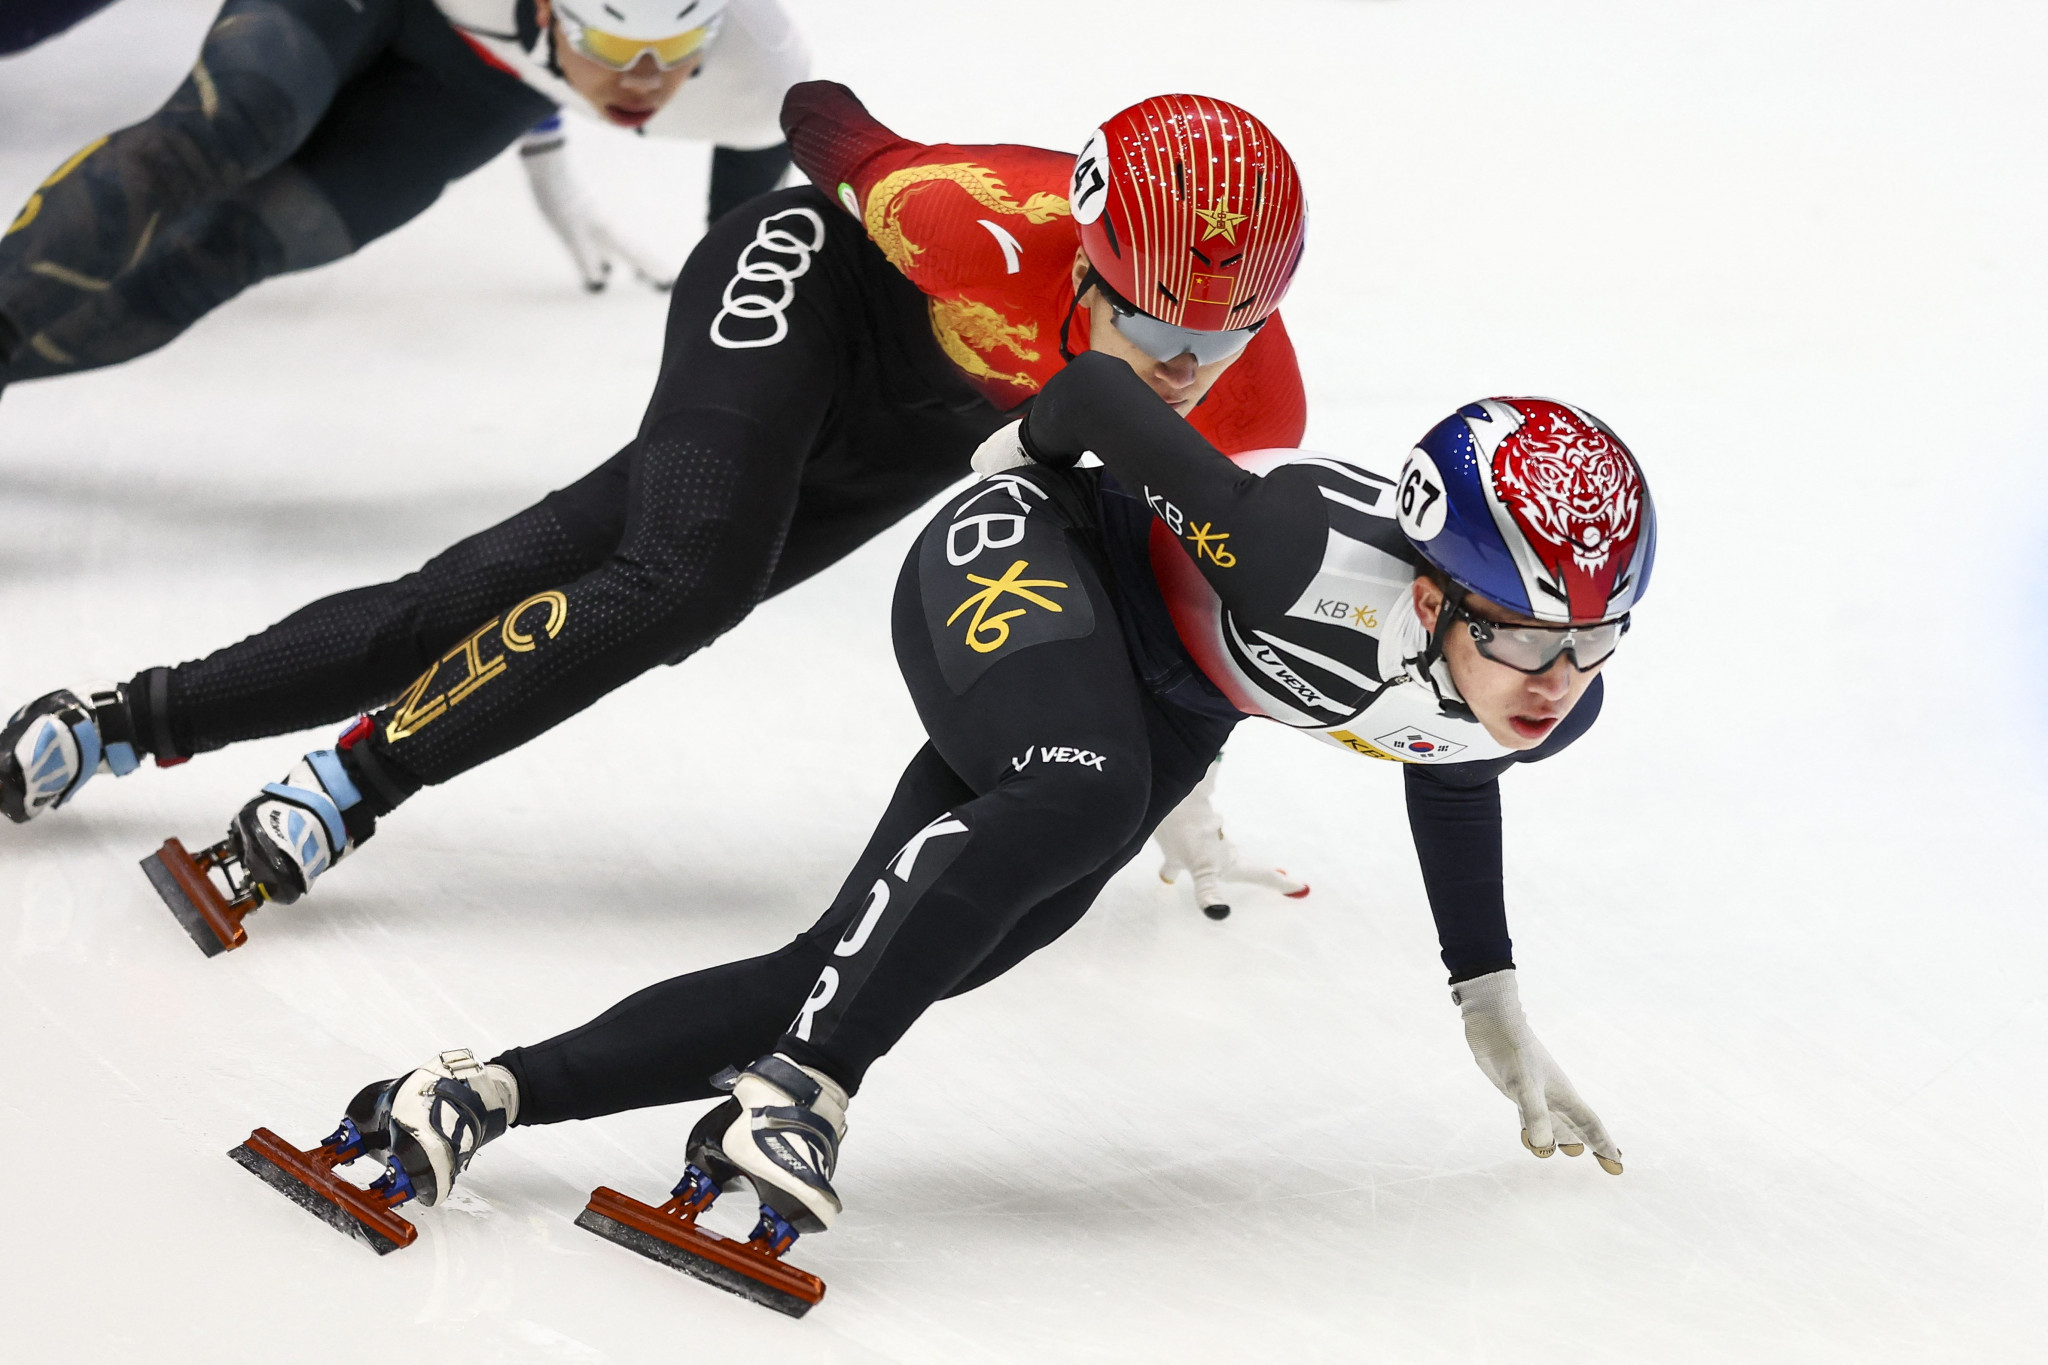 South Korean athletes will be hoping to dominate on home ice at the 2023 ISU World Short Track Speed Skating Championships in Seoul ©Getty Images